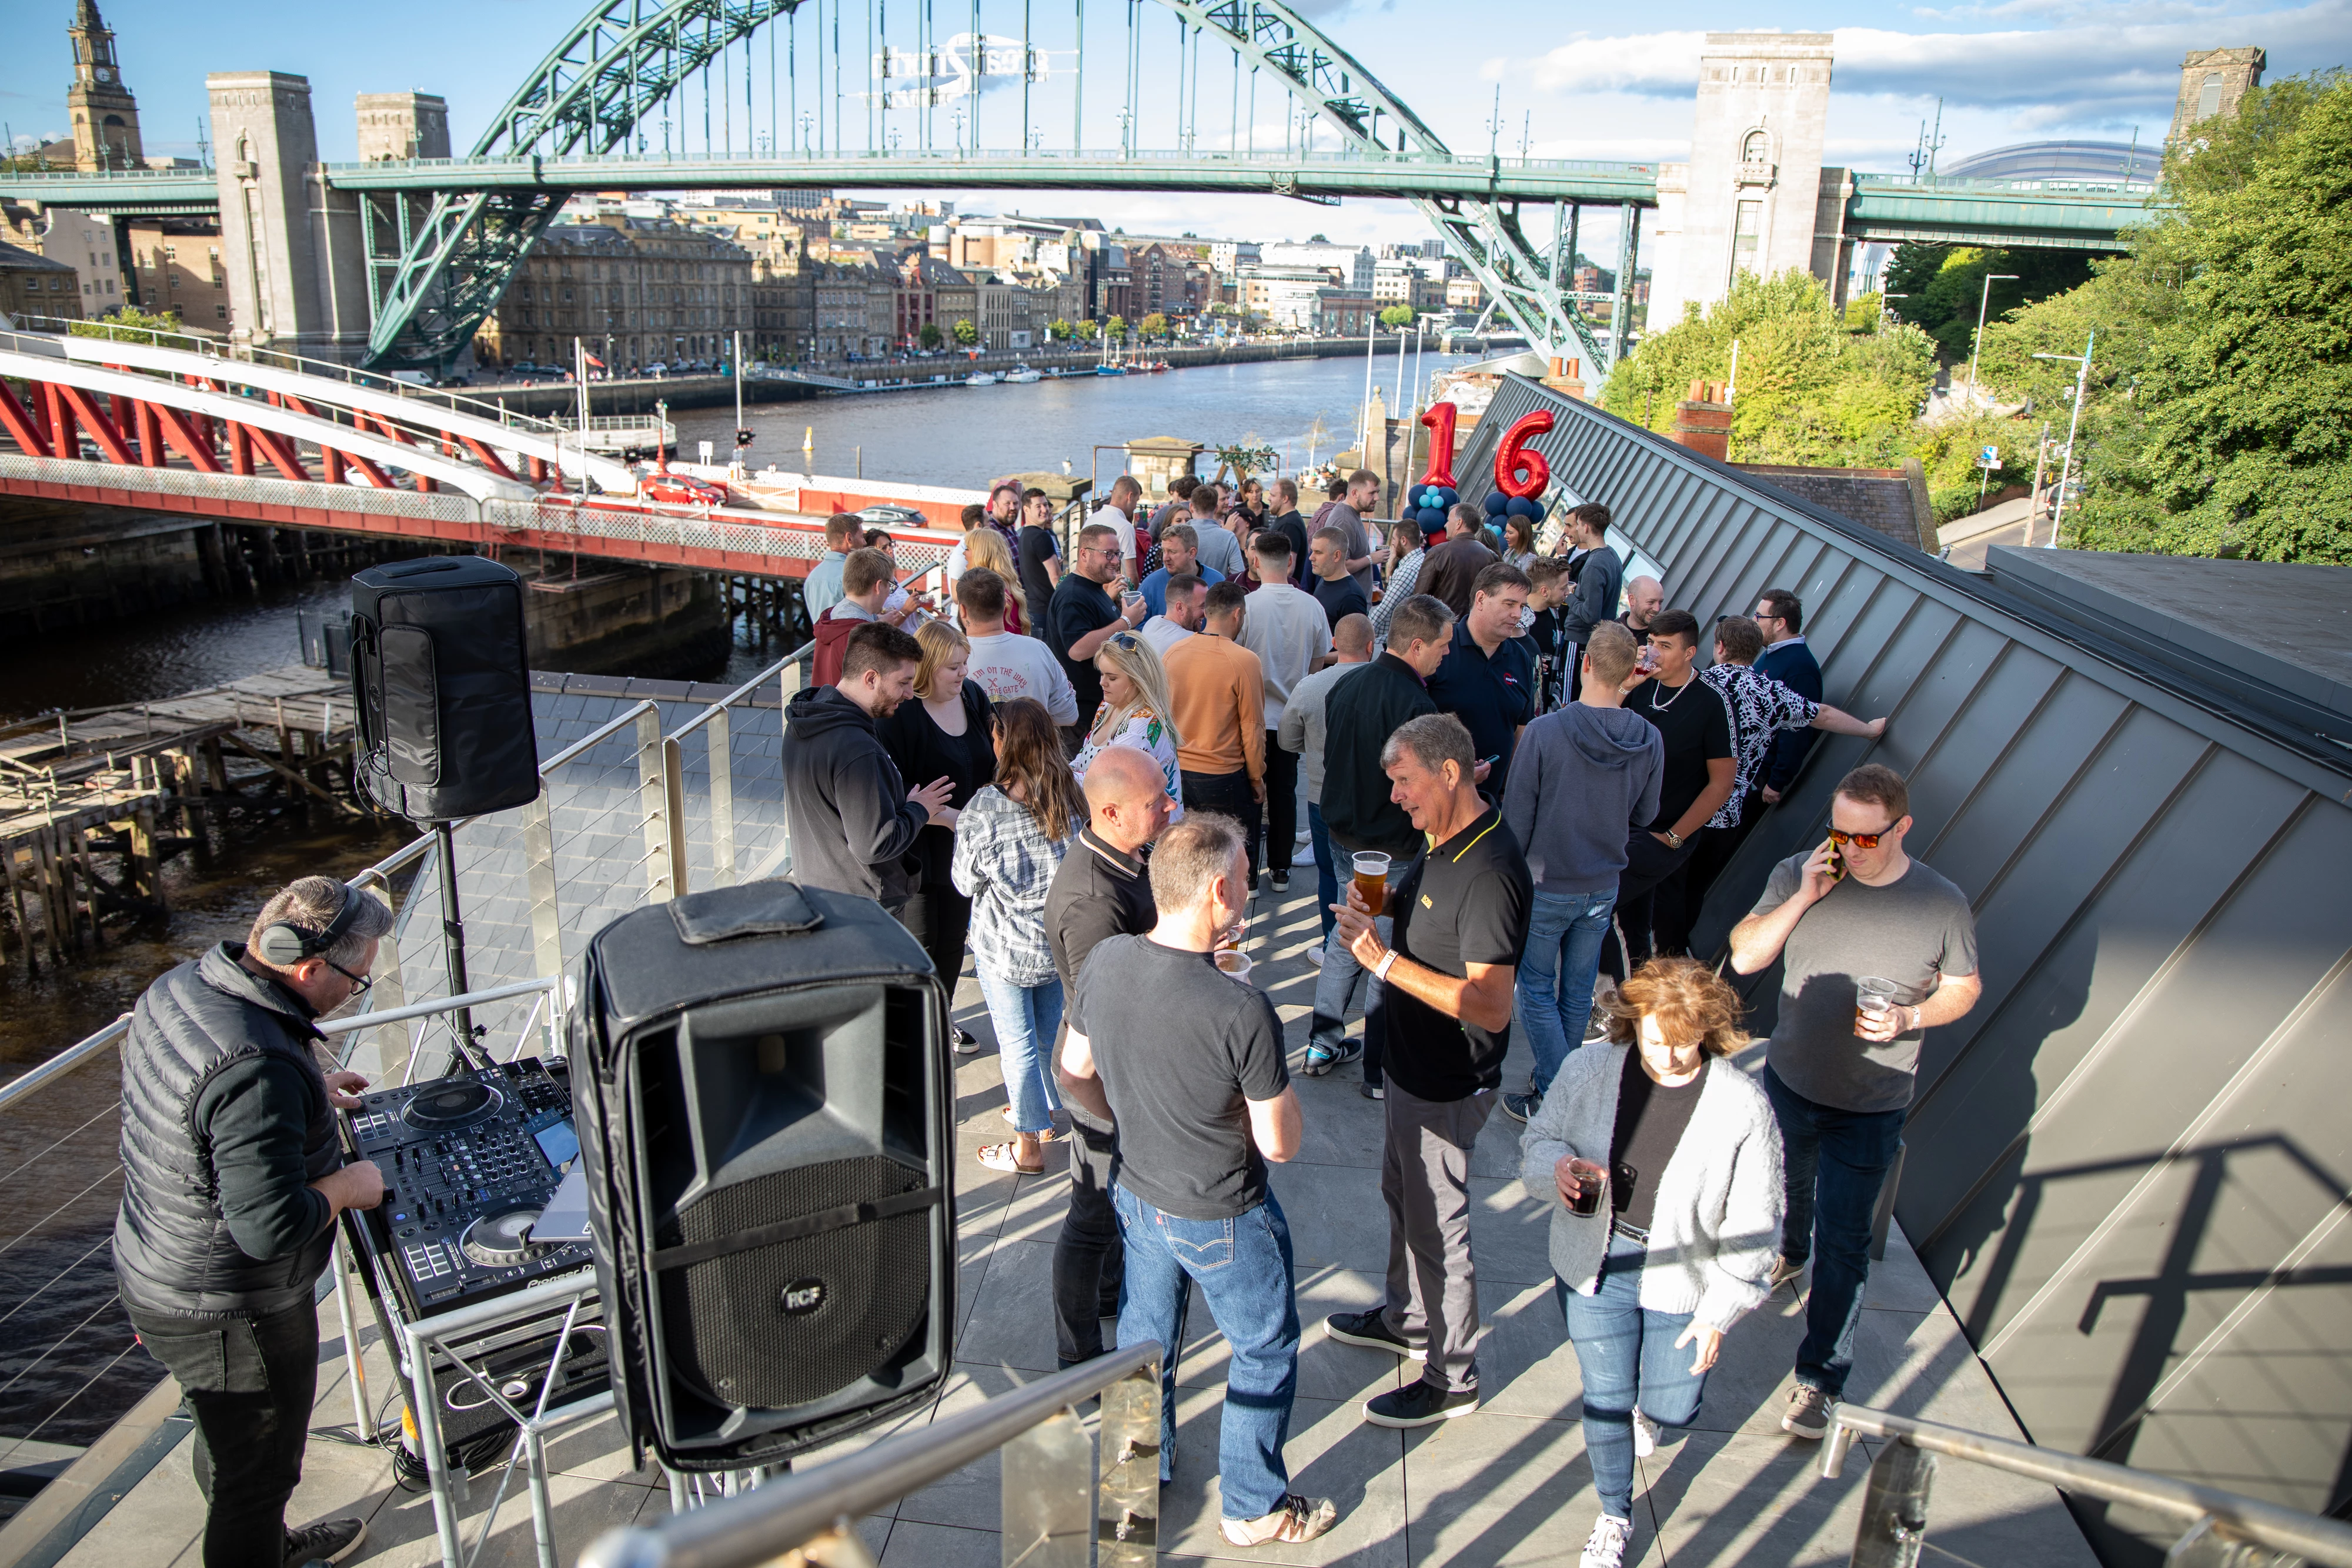 Employees from Aspire Technology Solutions celebrate on the rooftop of their HQ at Pipewell Quay, Gateshead.